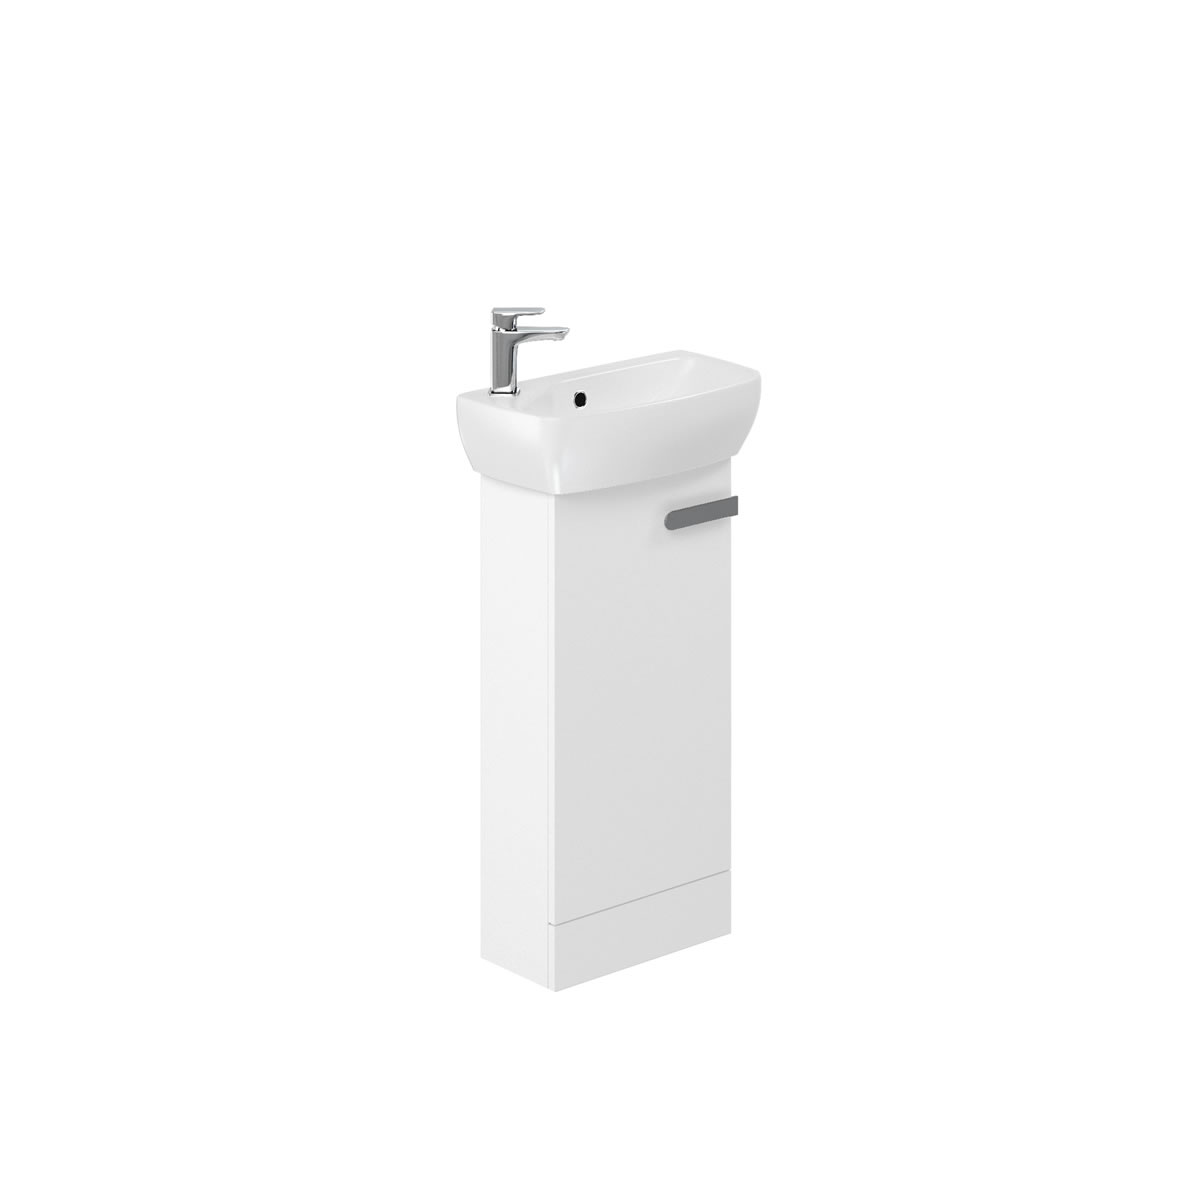 MyHome Cloakroom Floor Standing Unit & Basin White